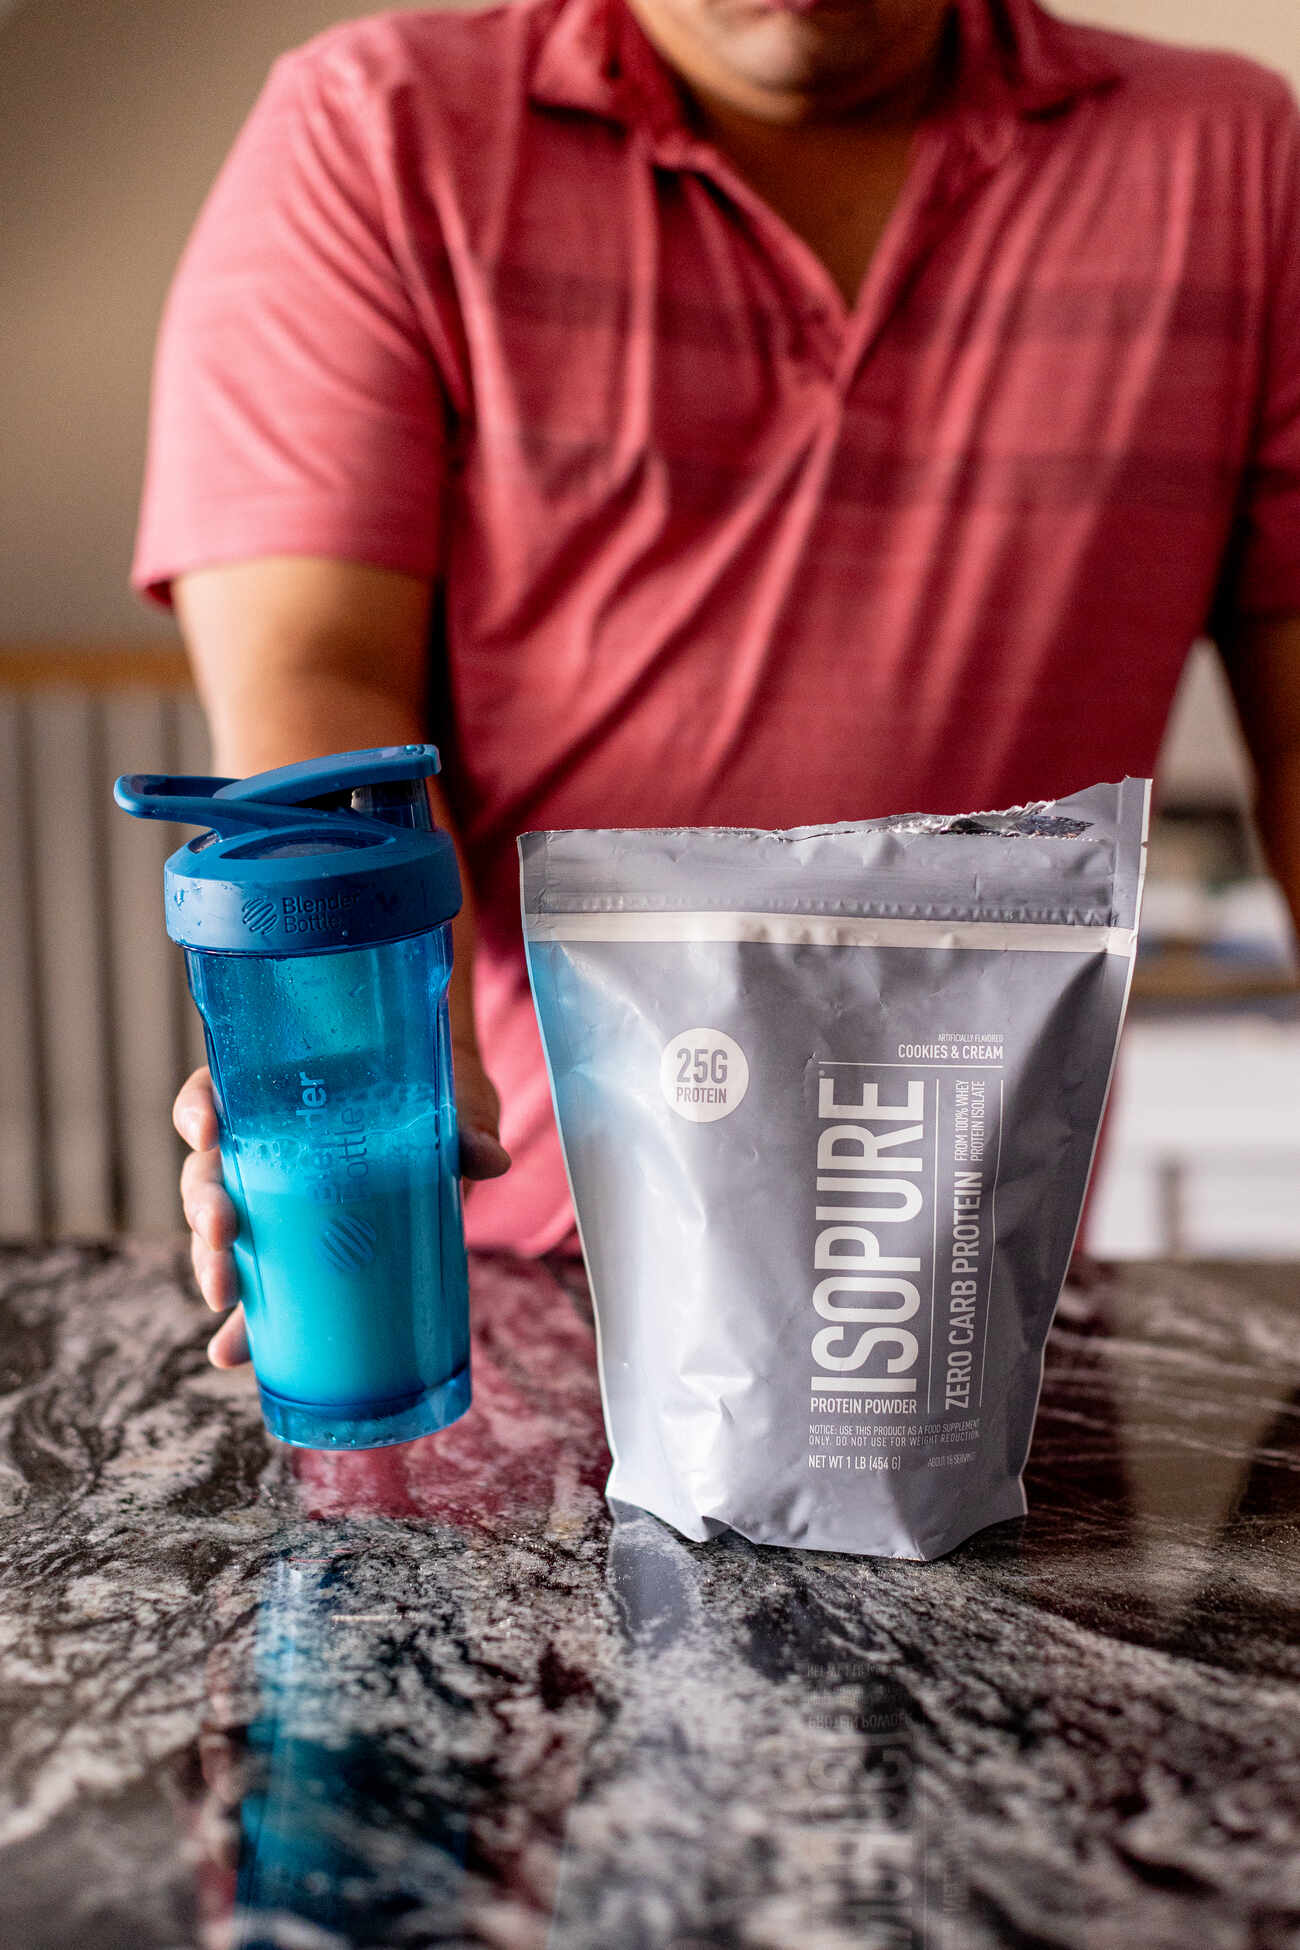 Main holding a protein shake in a blue Bottle Blender next to a bag of Isopure protein powder on a black and white granite countertop